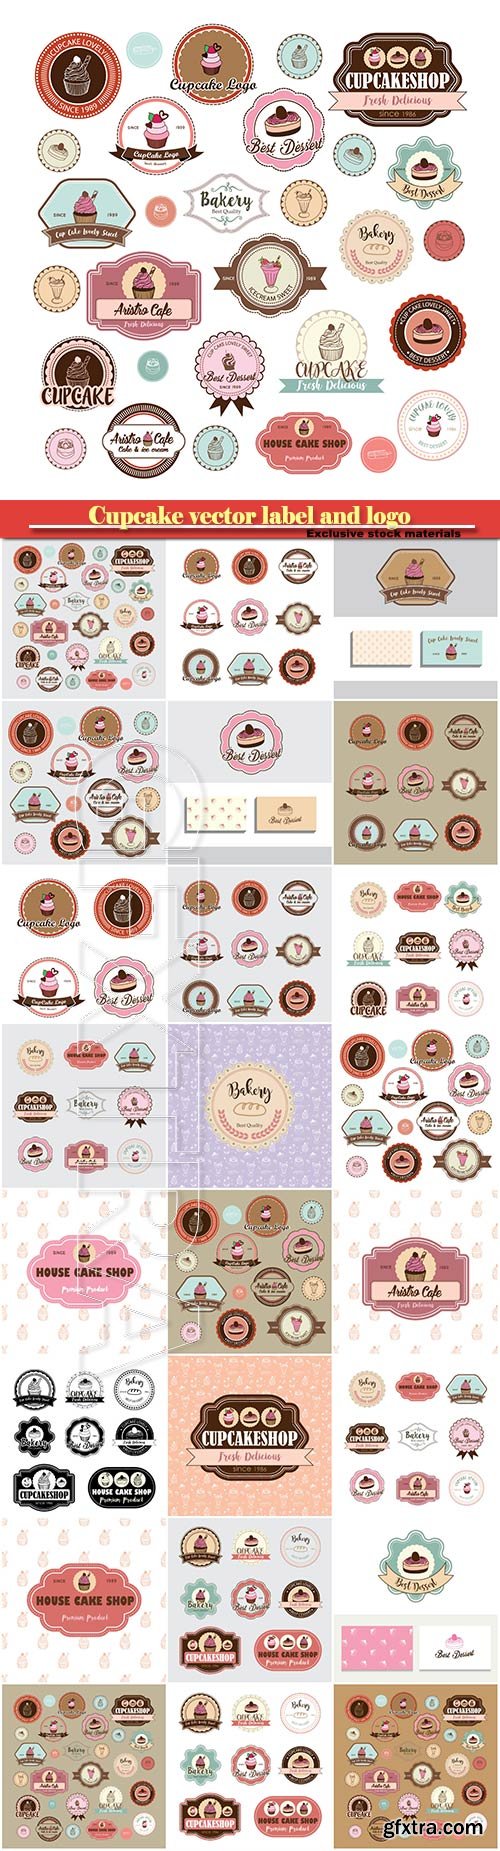 Cupcake vector label and logo illustration